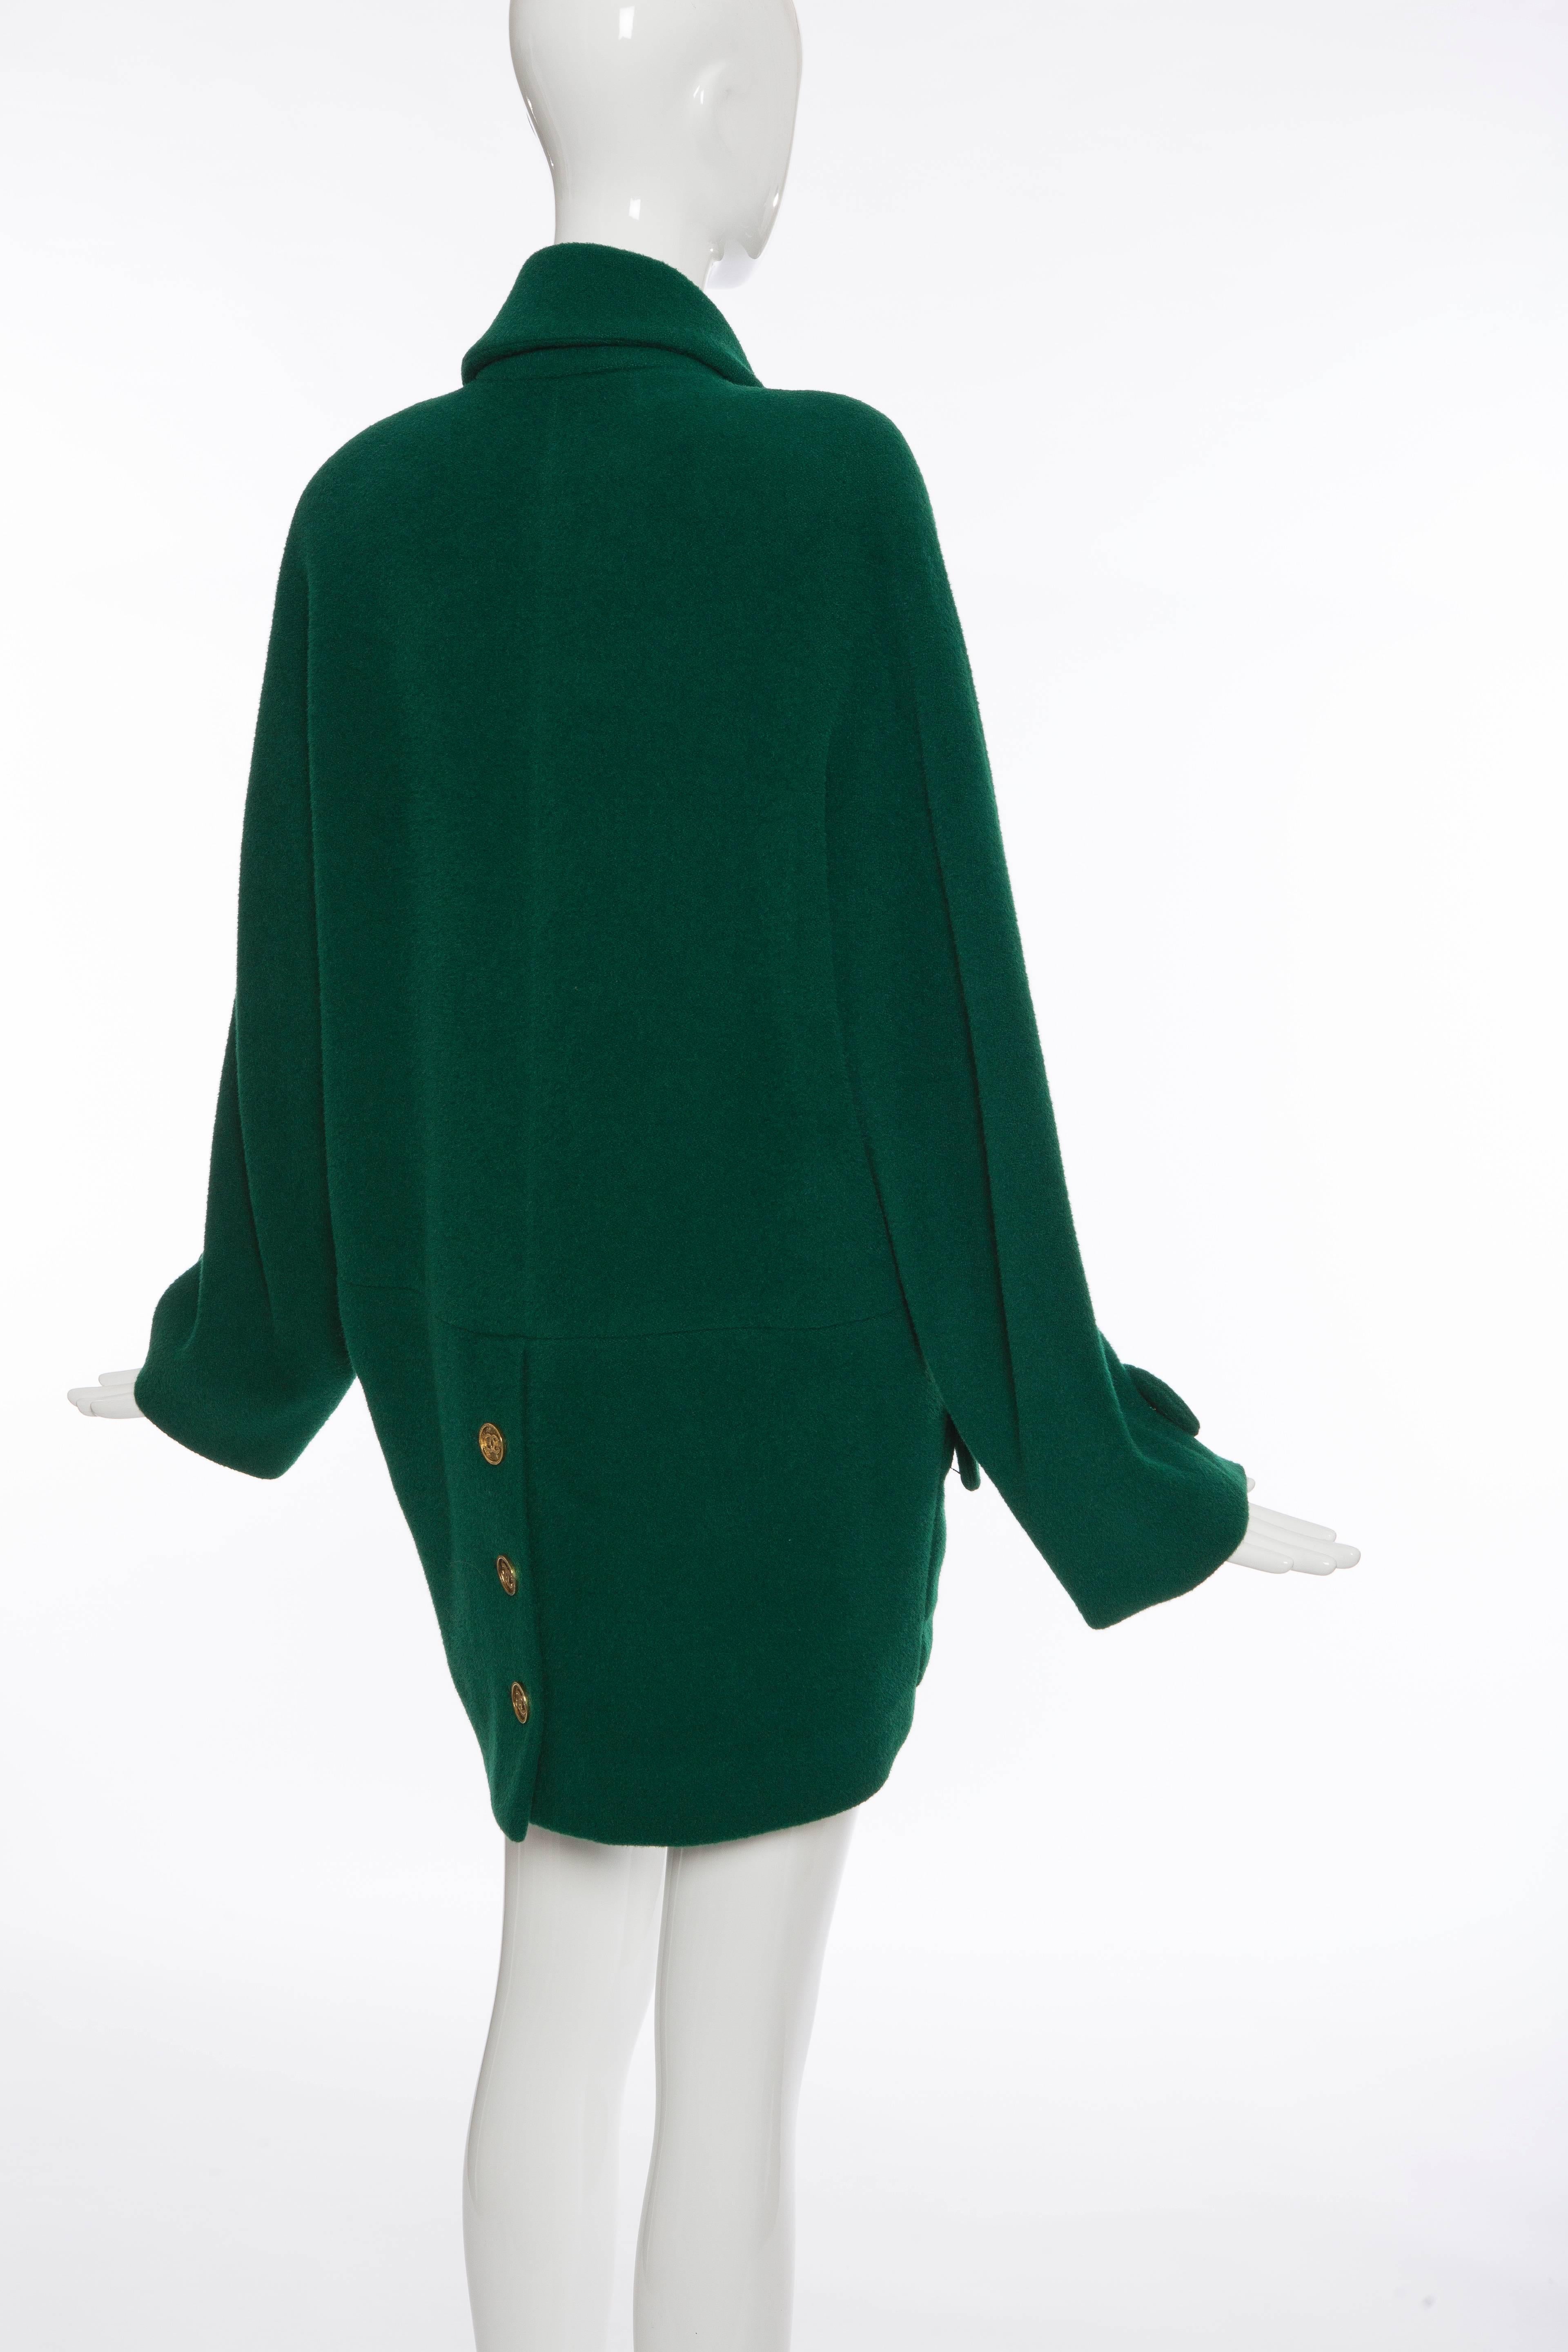 Women's Chanel Emerald Green Wool Double Breasted Cocoon Coat, Circa 1980's